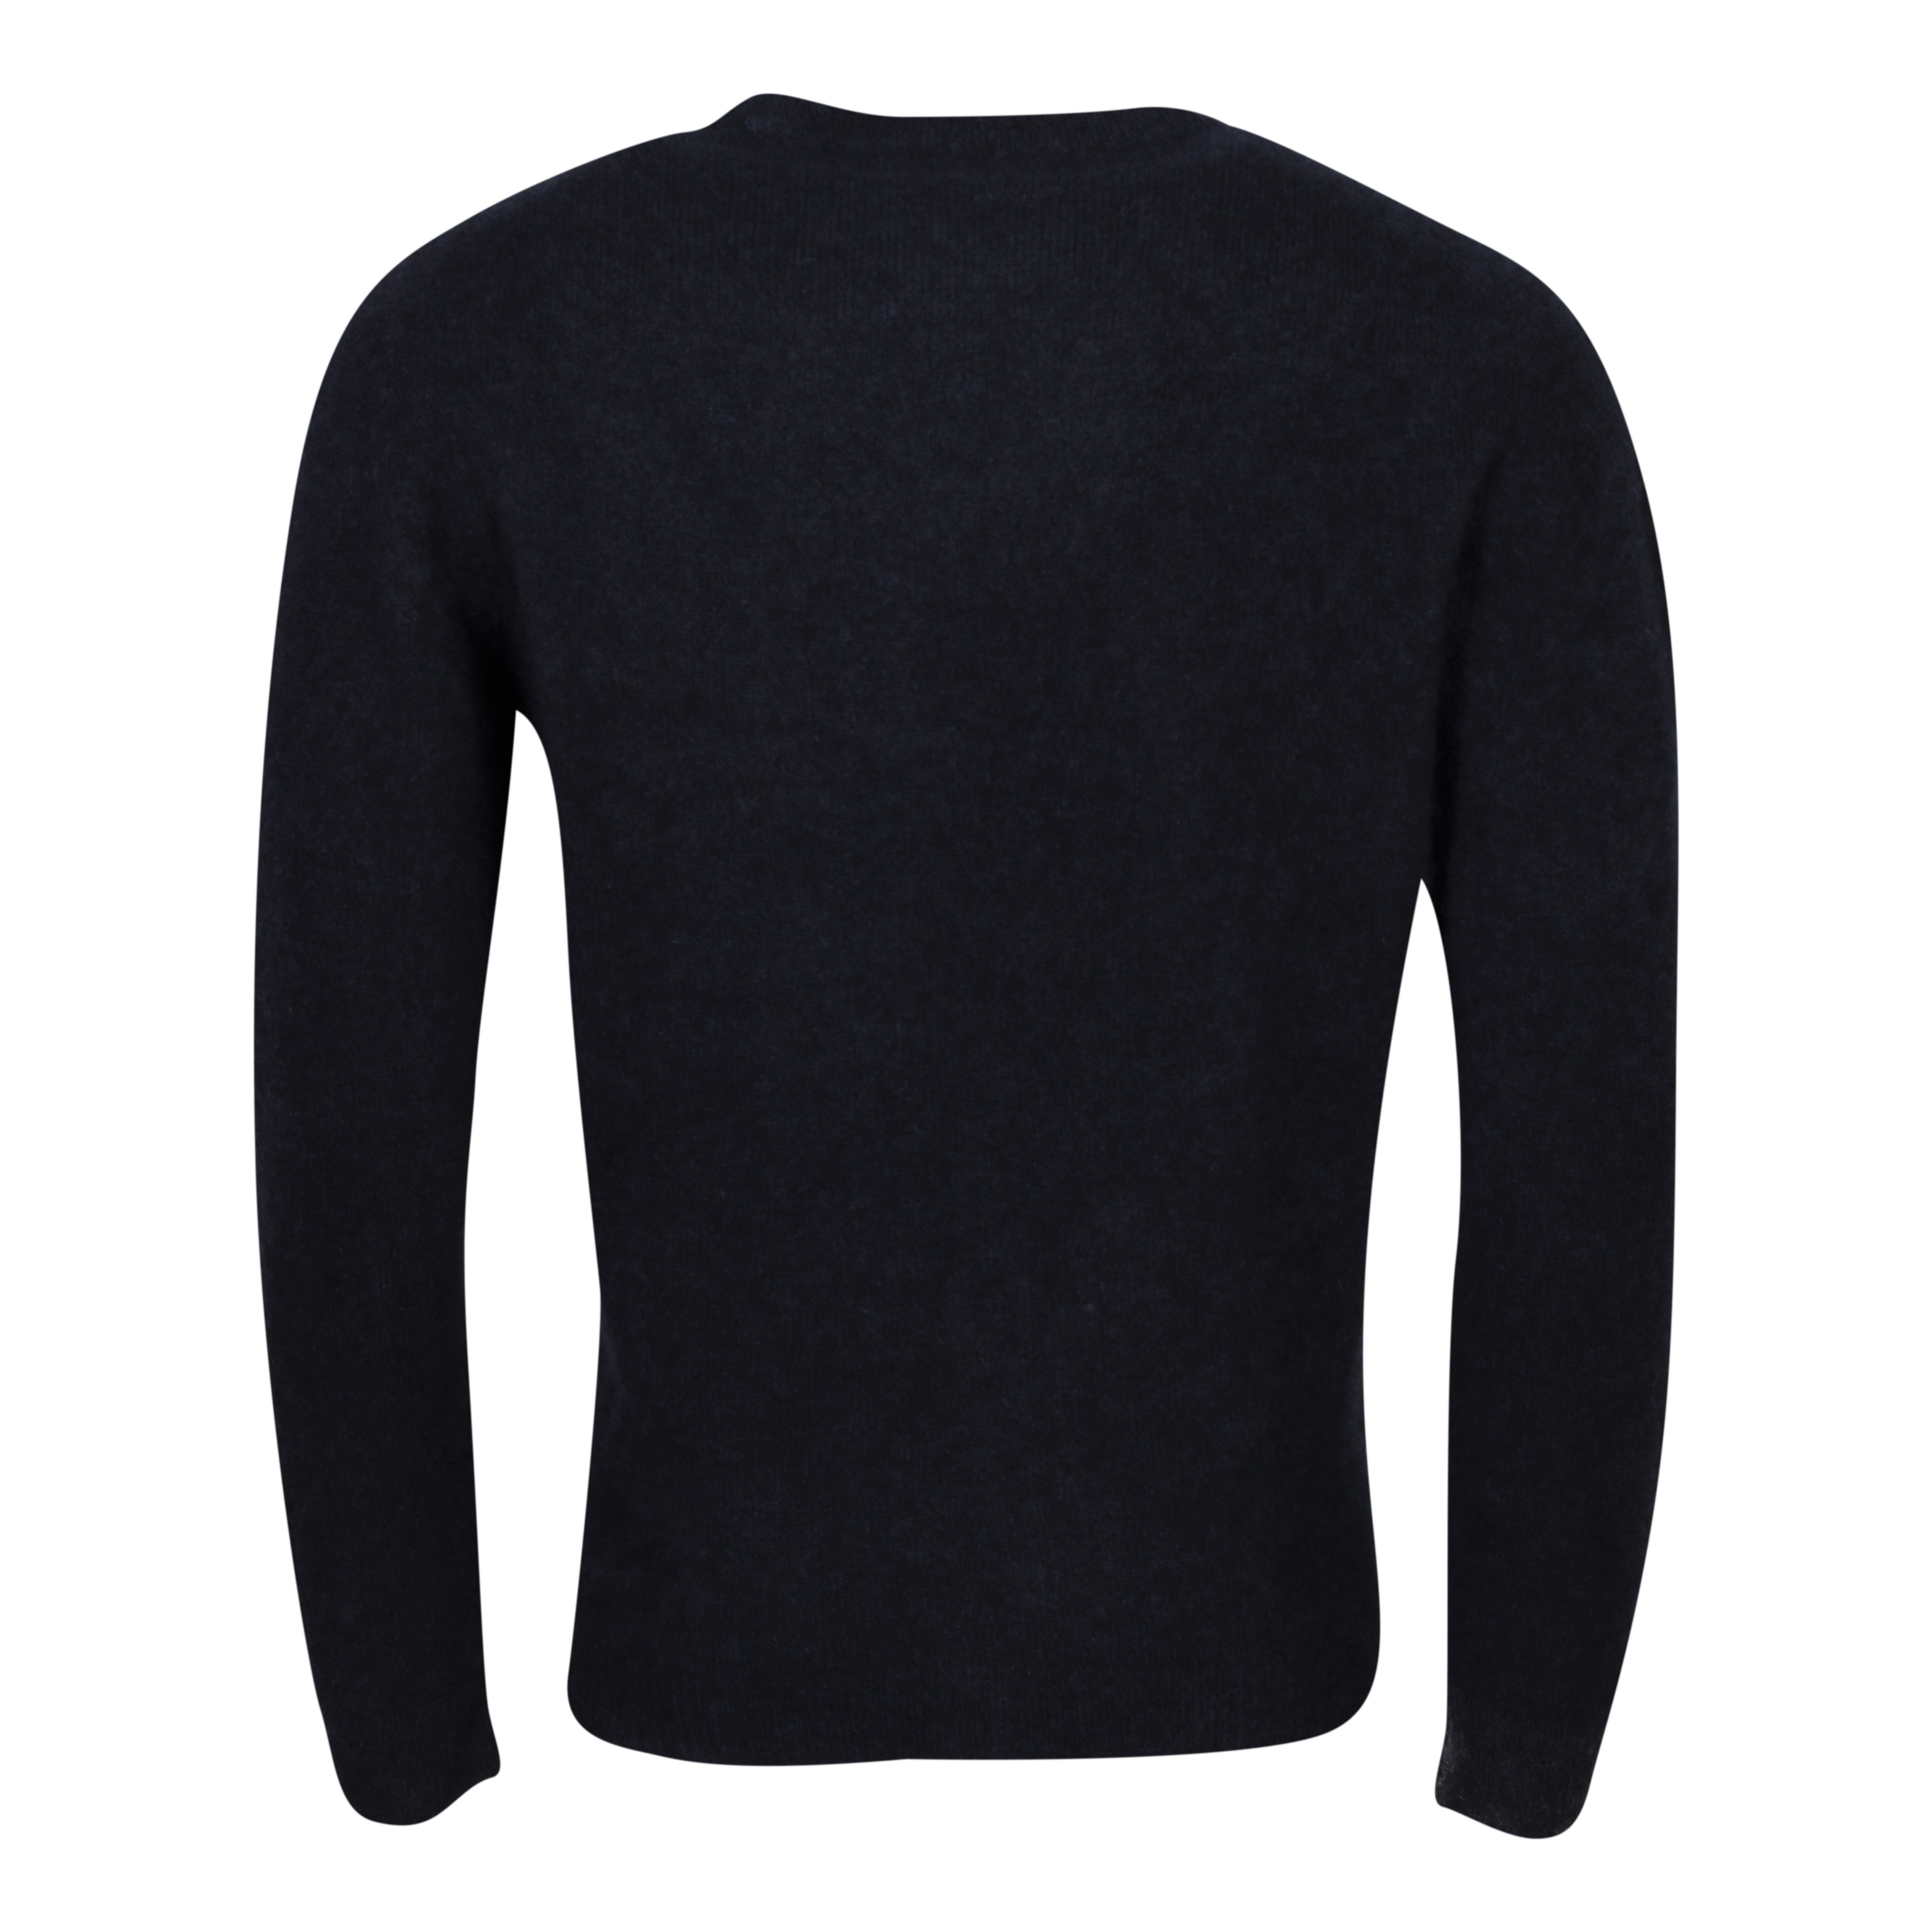 Roberto Collina Fluffy Knit Pullover in Navy 54